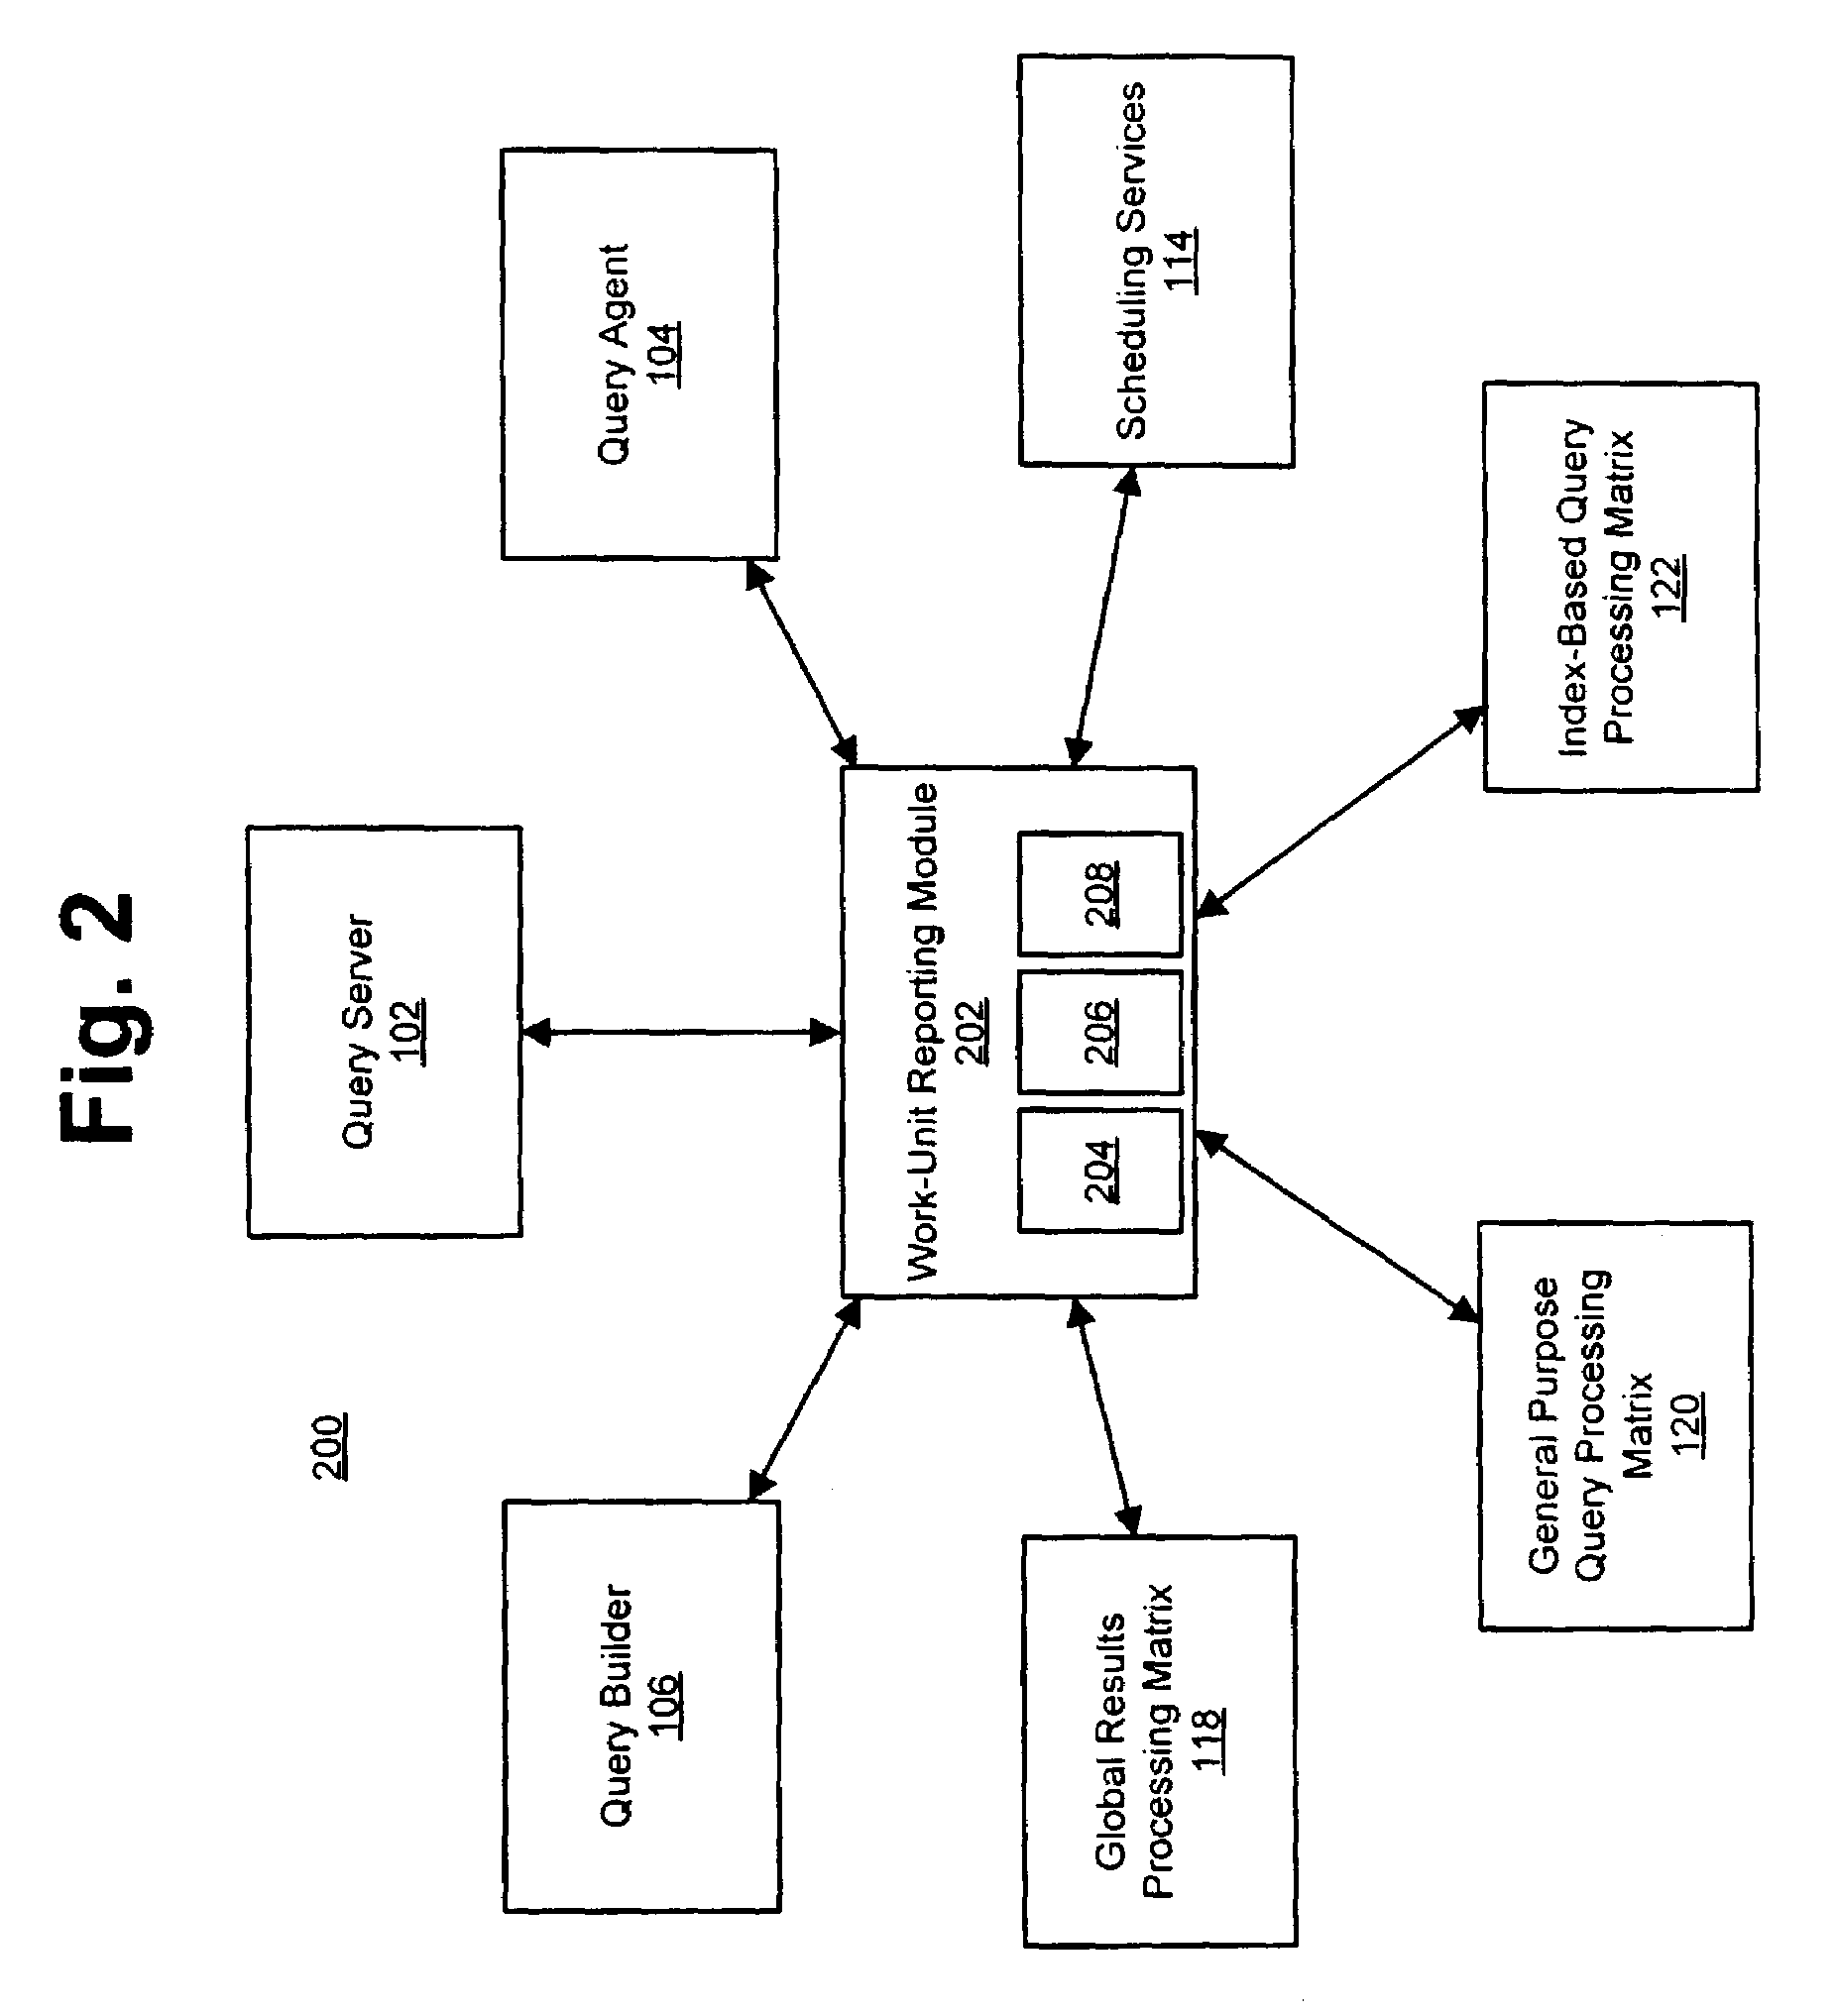 Query scheduling in a parallel-processing database system